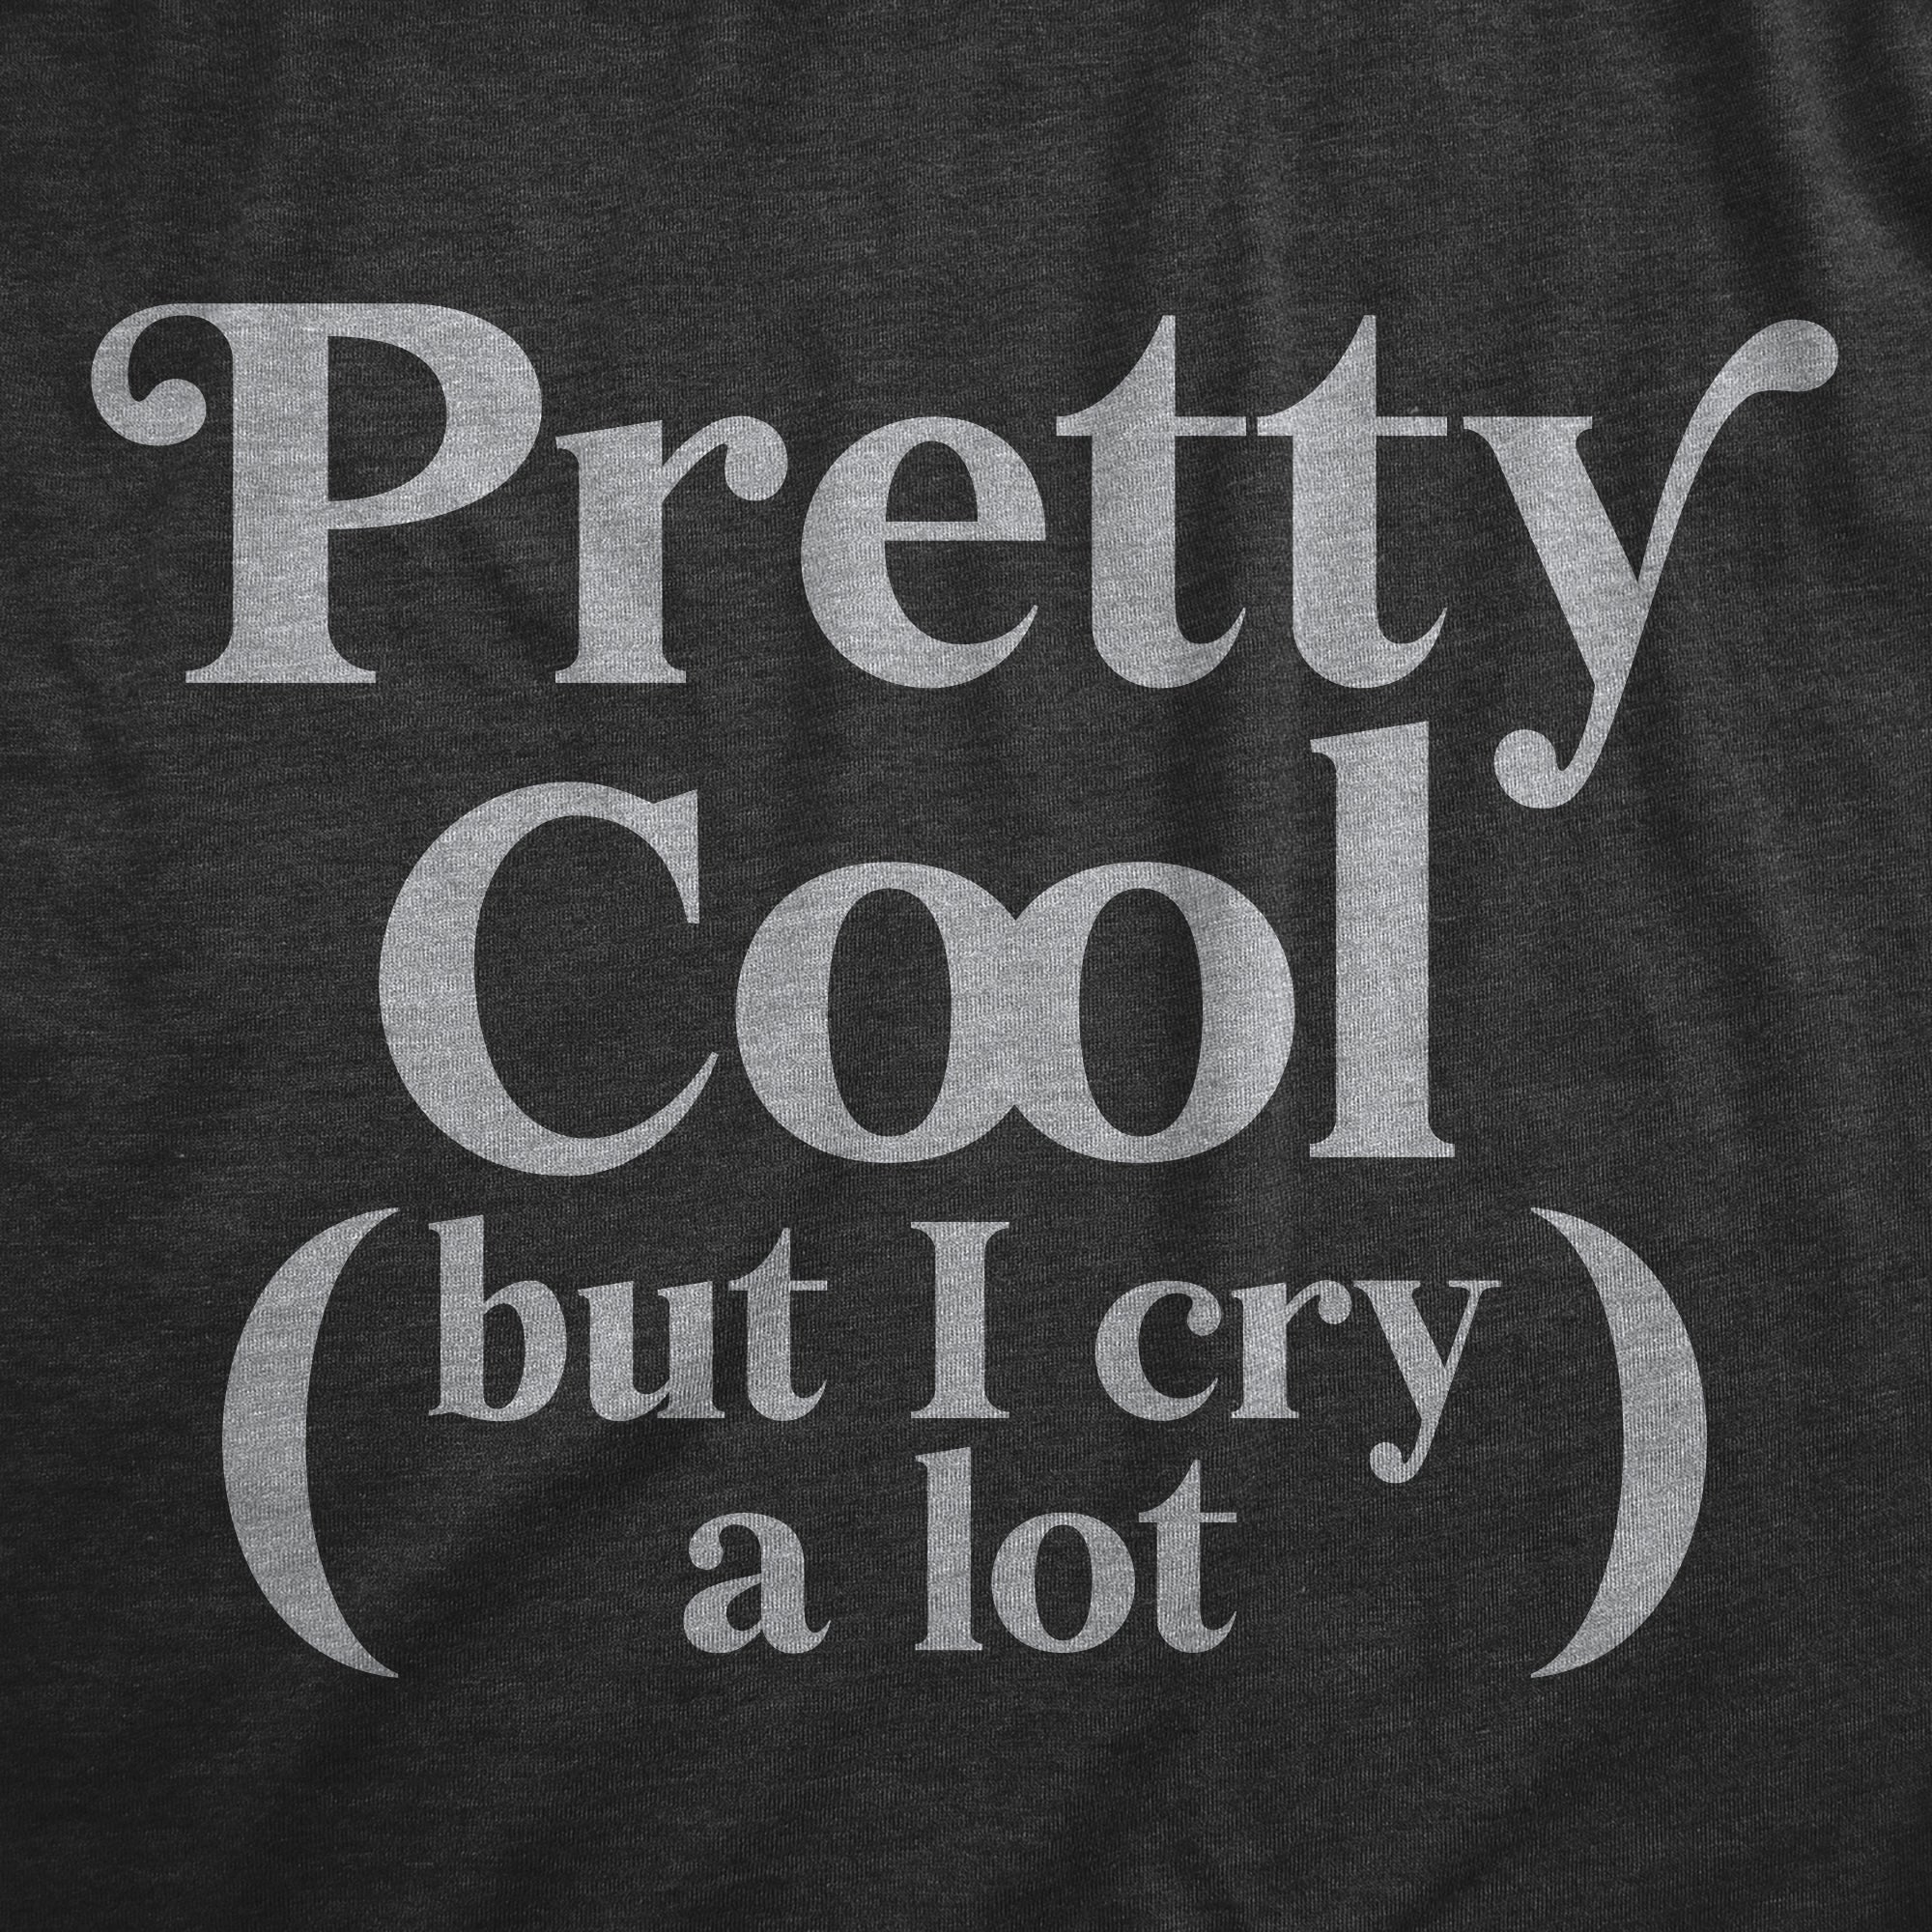 Funny Heather Black - PRETTYCOOL Pretty Cool But I Cry A Lot Onesie Nerdy Sarcastic Tee